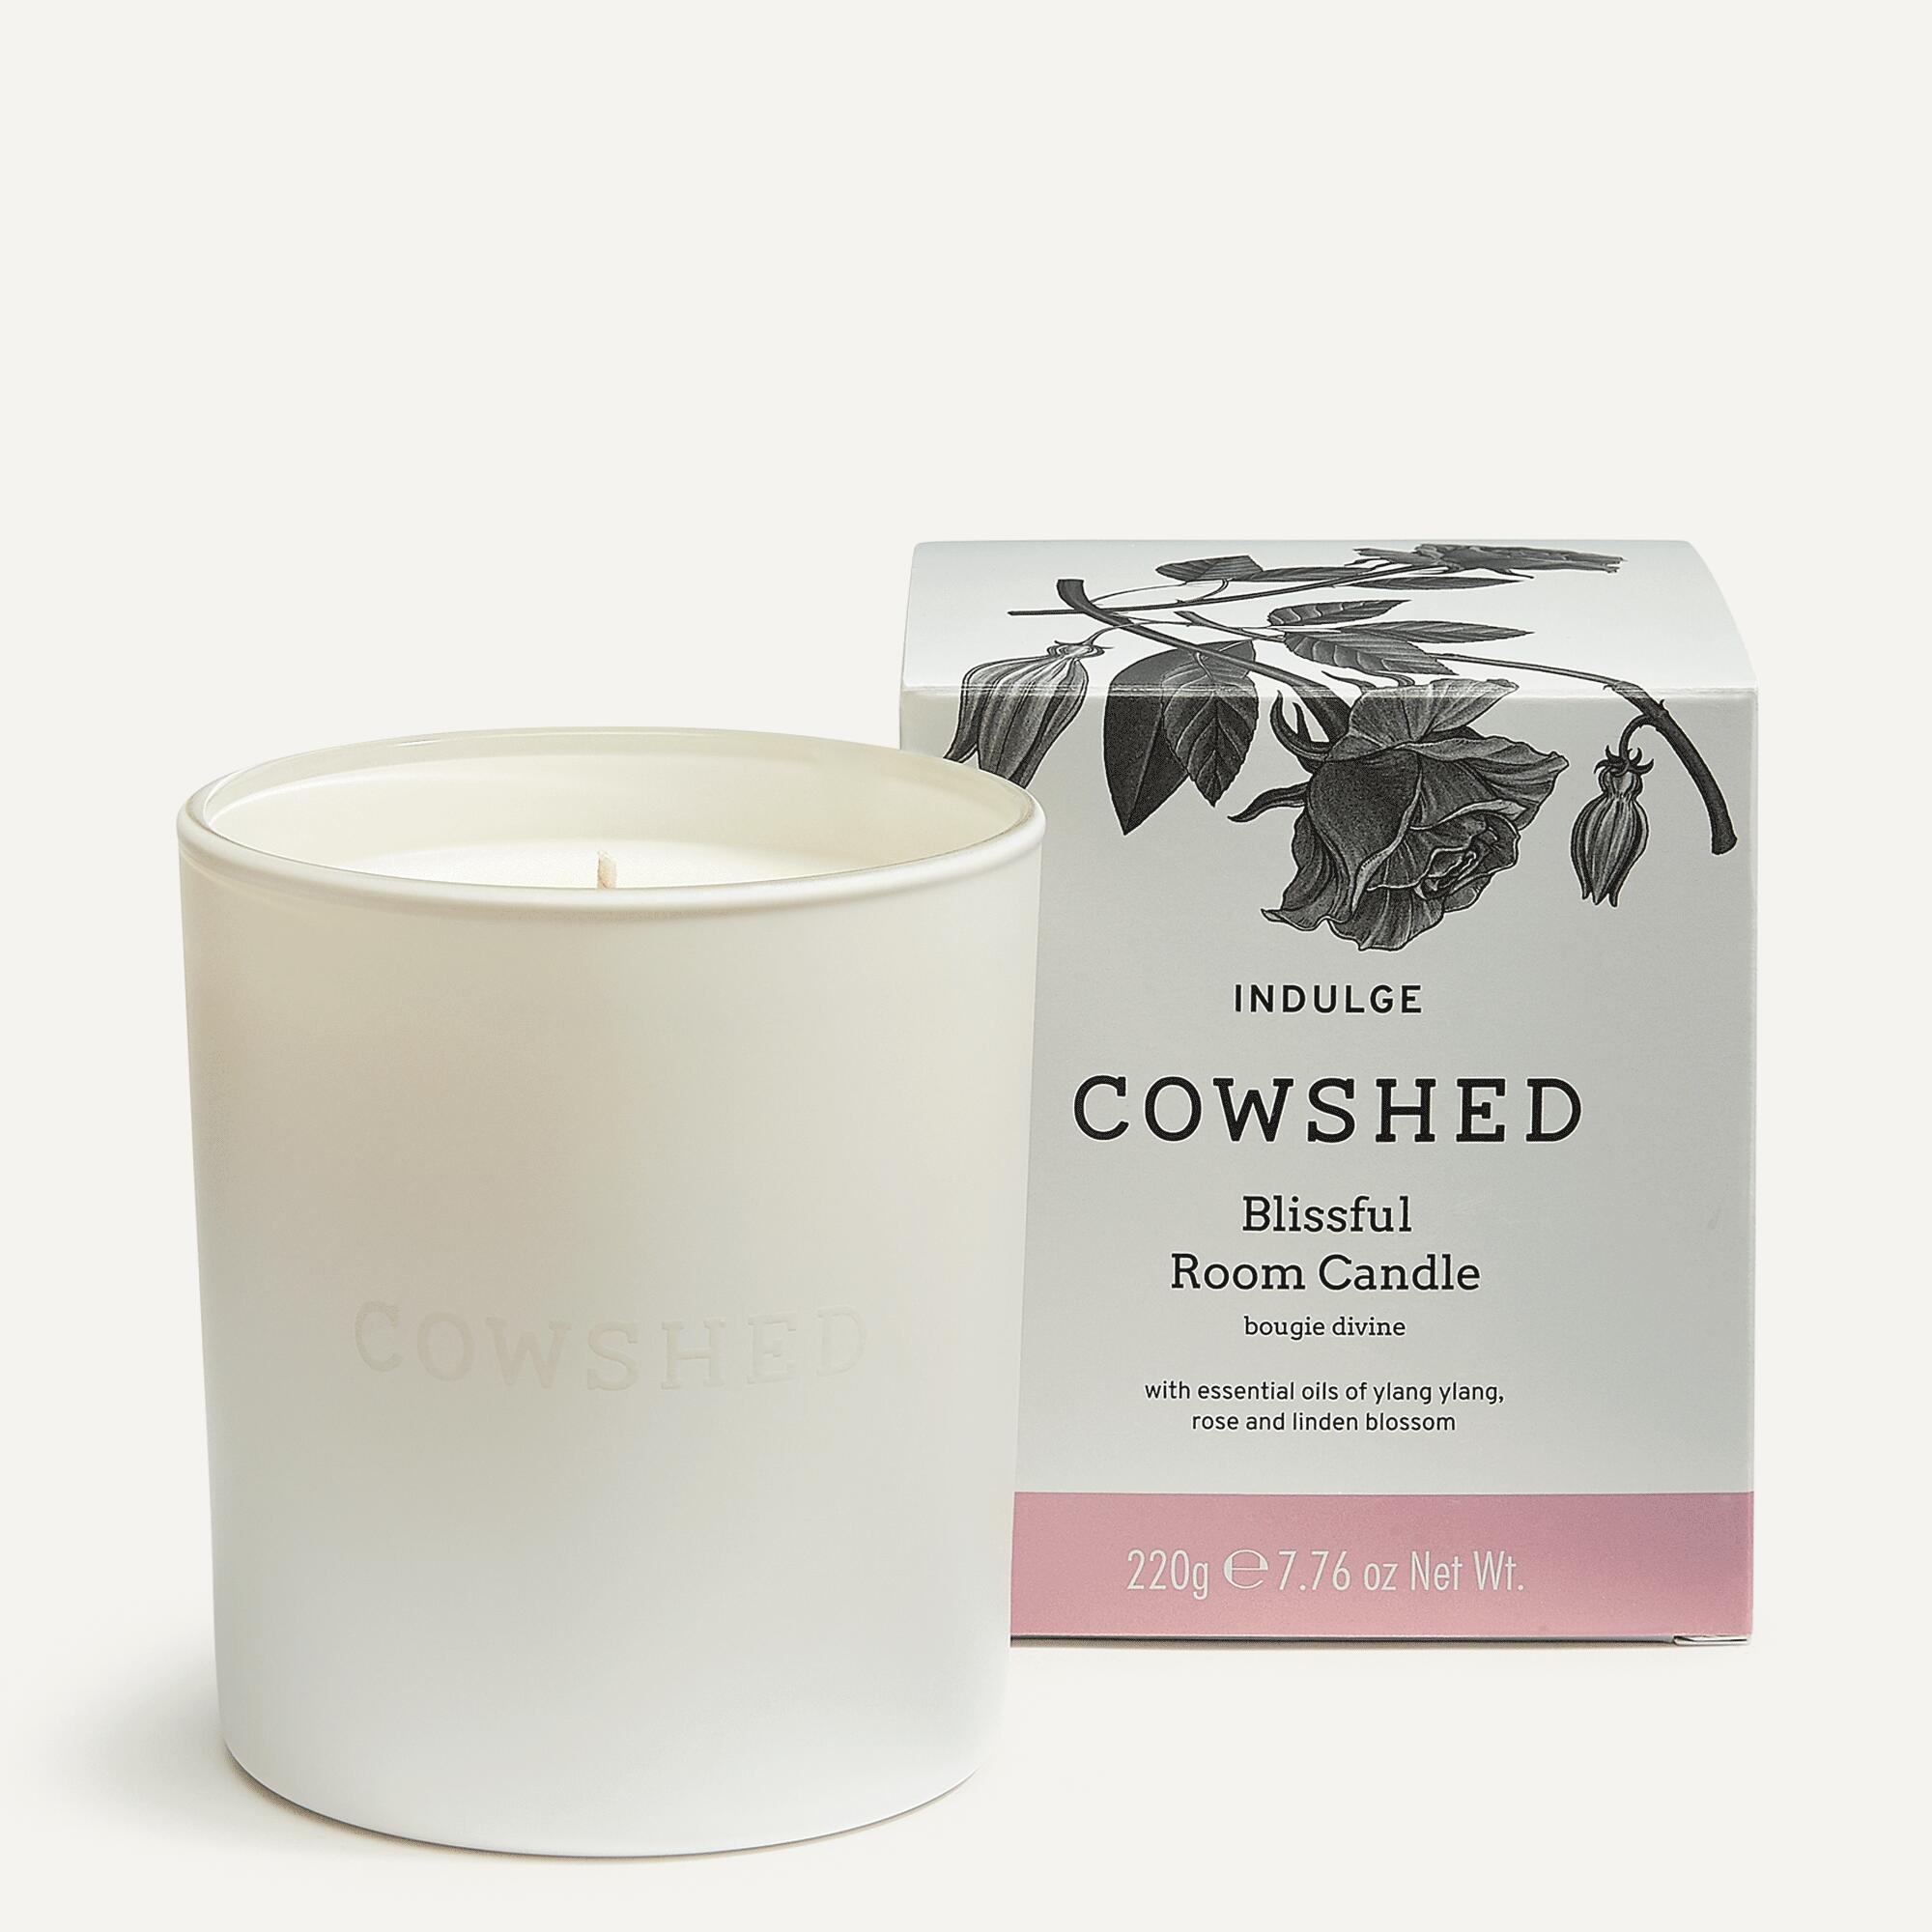 Cowshed-Indulge-Blissful-Room-Candle-220g